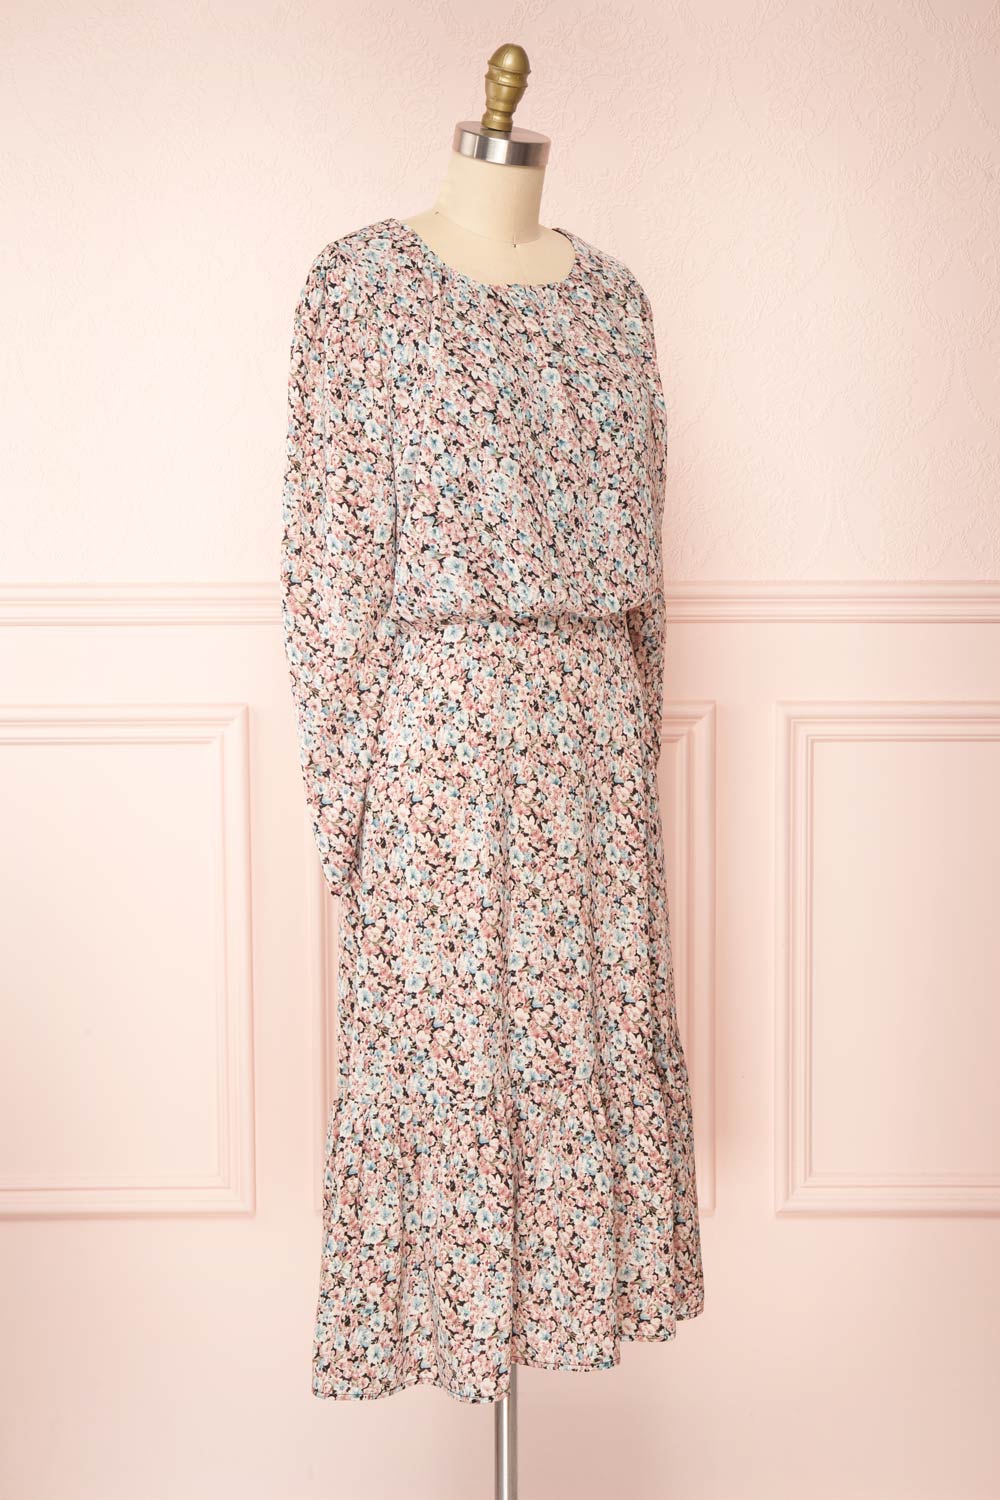 Rosalind Floral Long Sleeve Midi Dress | Boutique 1861 side view